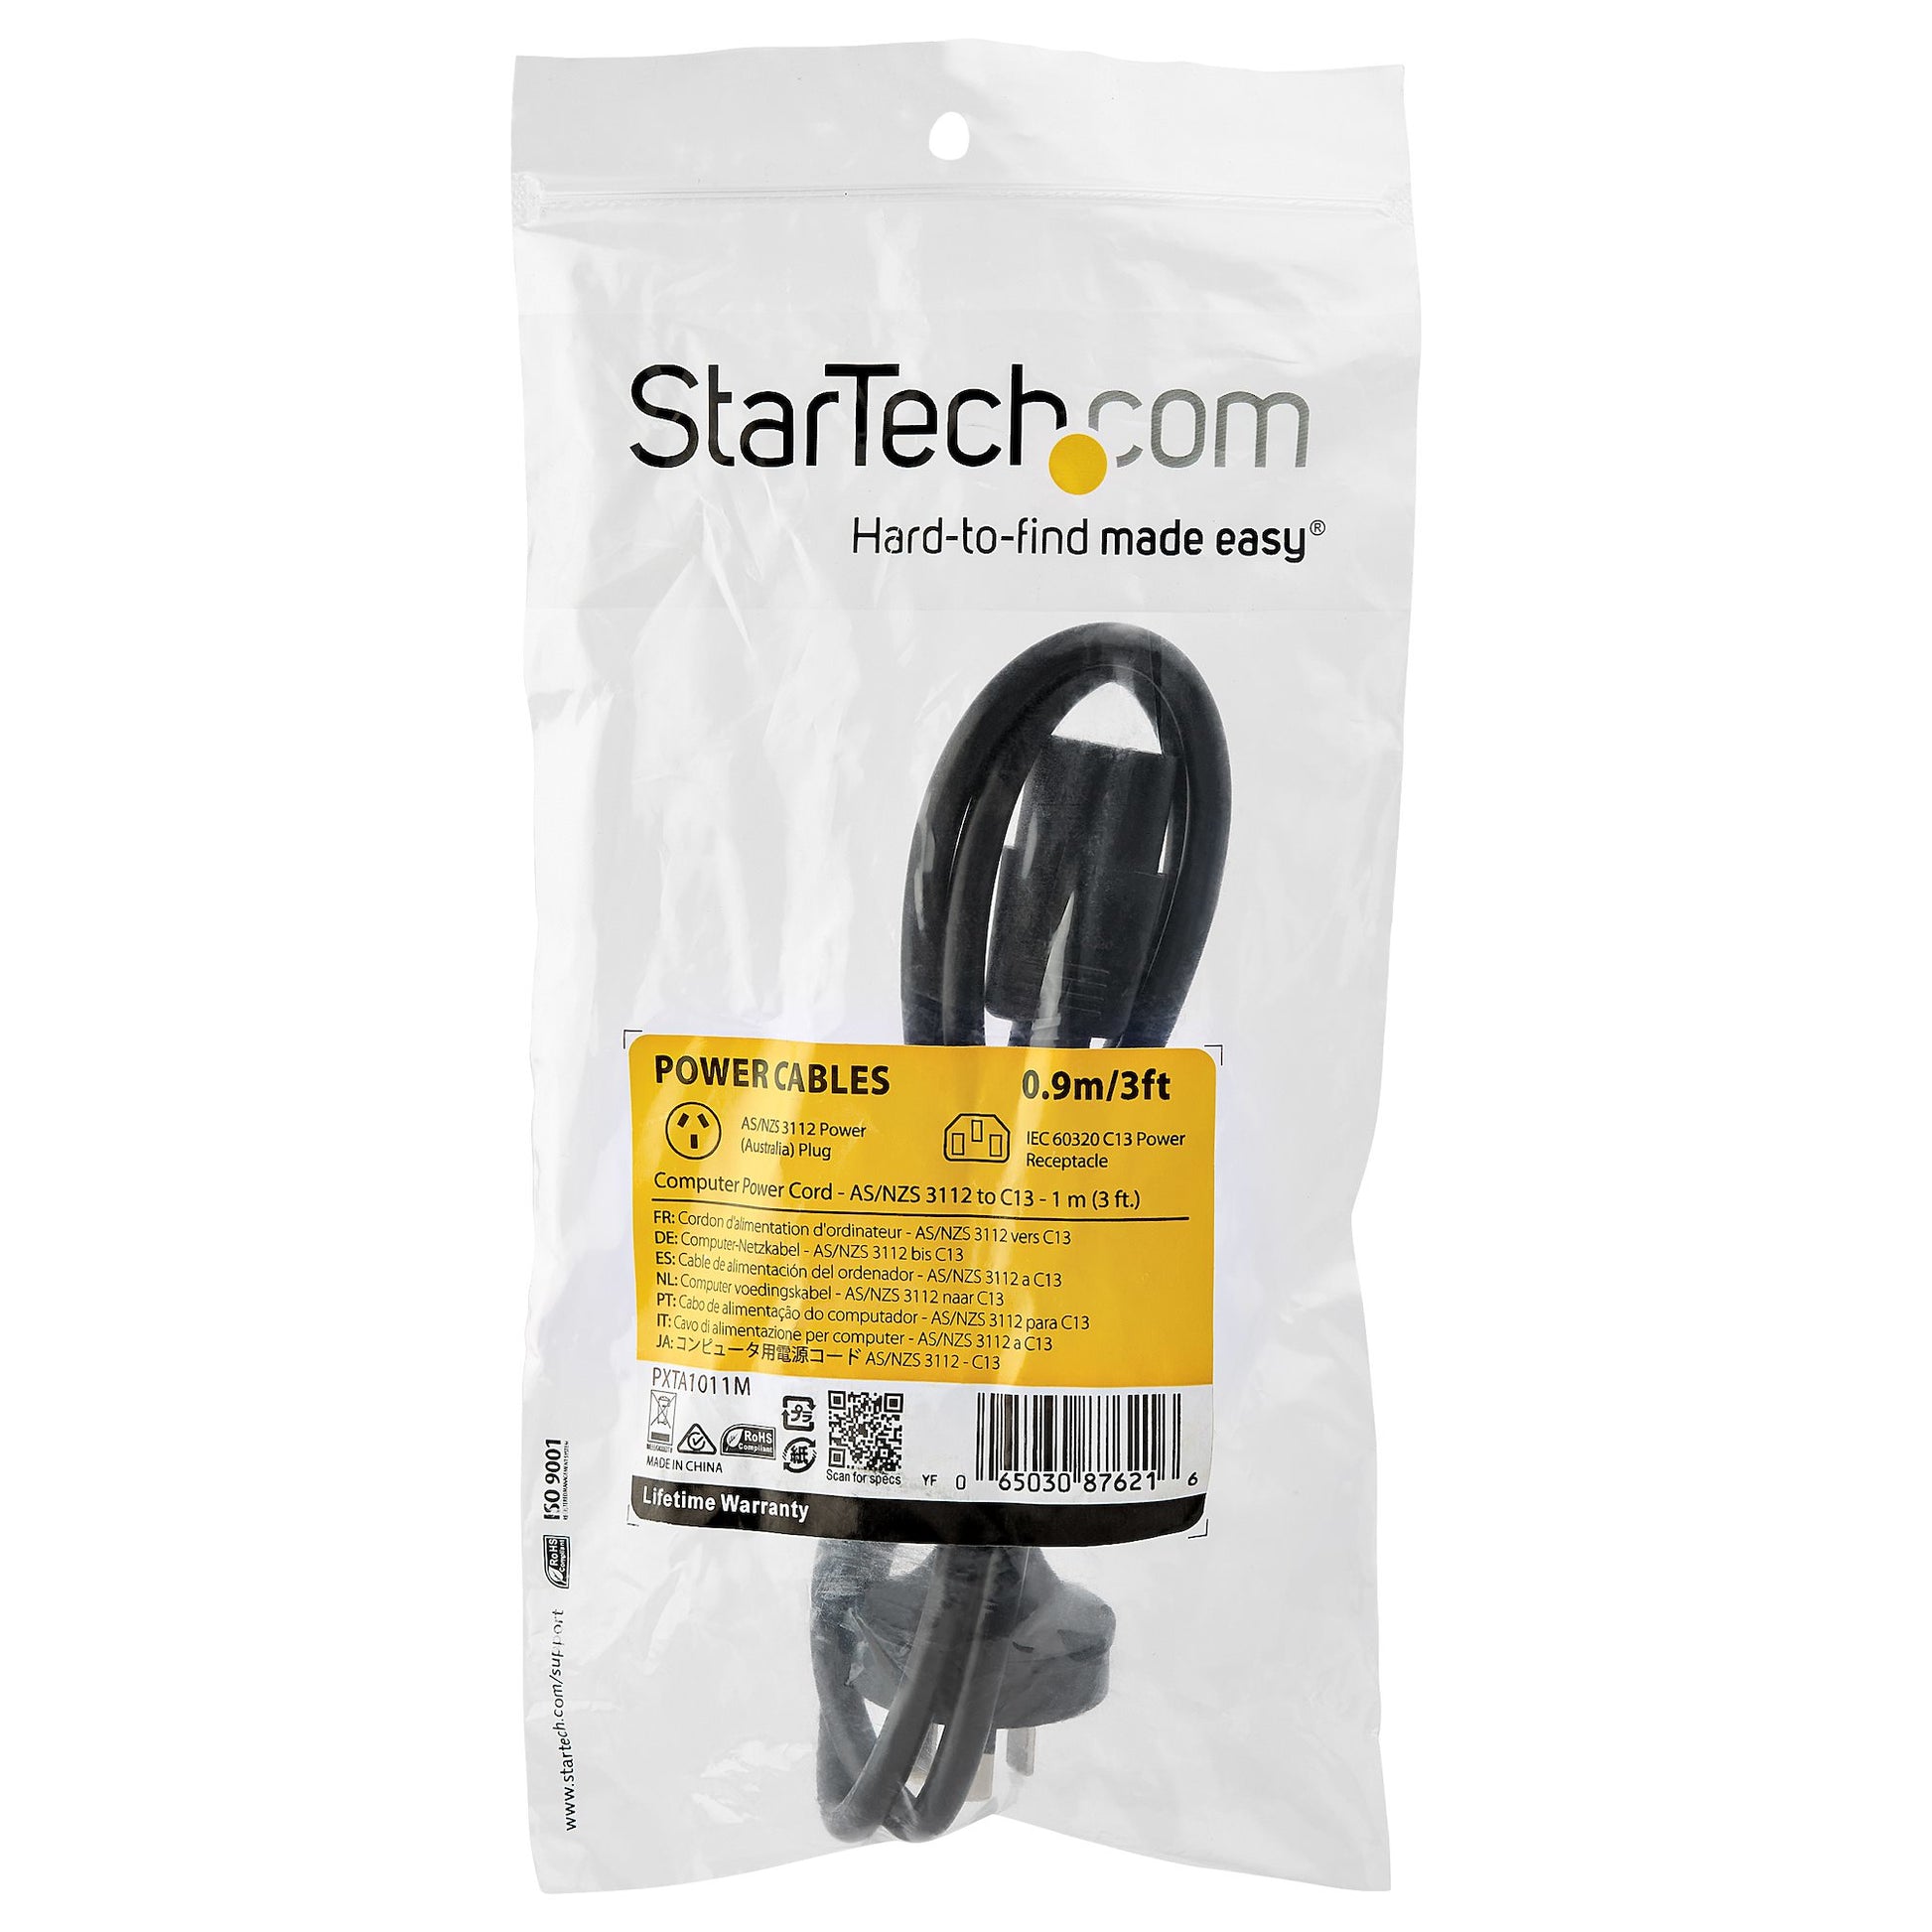 StarTech.com Power Supply Cord - AS/NZS 3112 to C13 - 2 m (6 ft.)-4